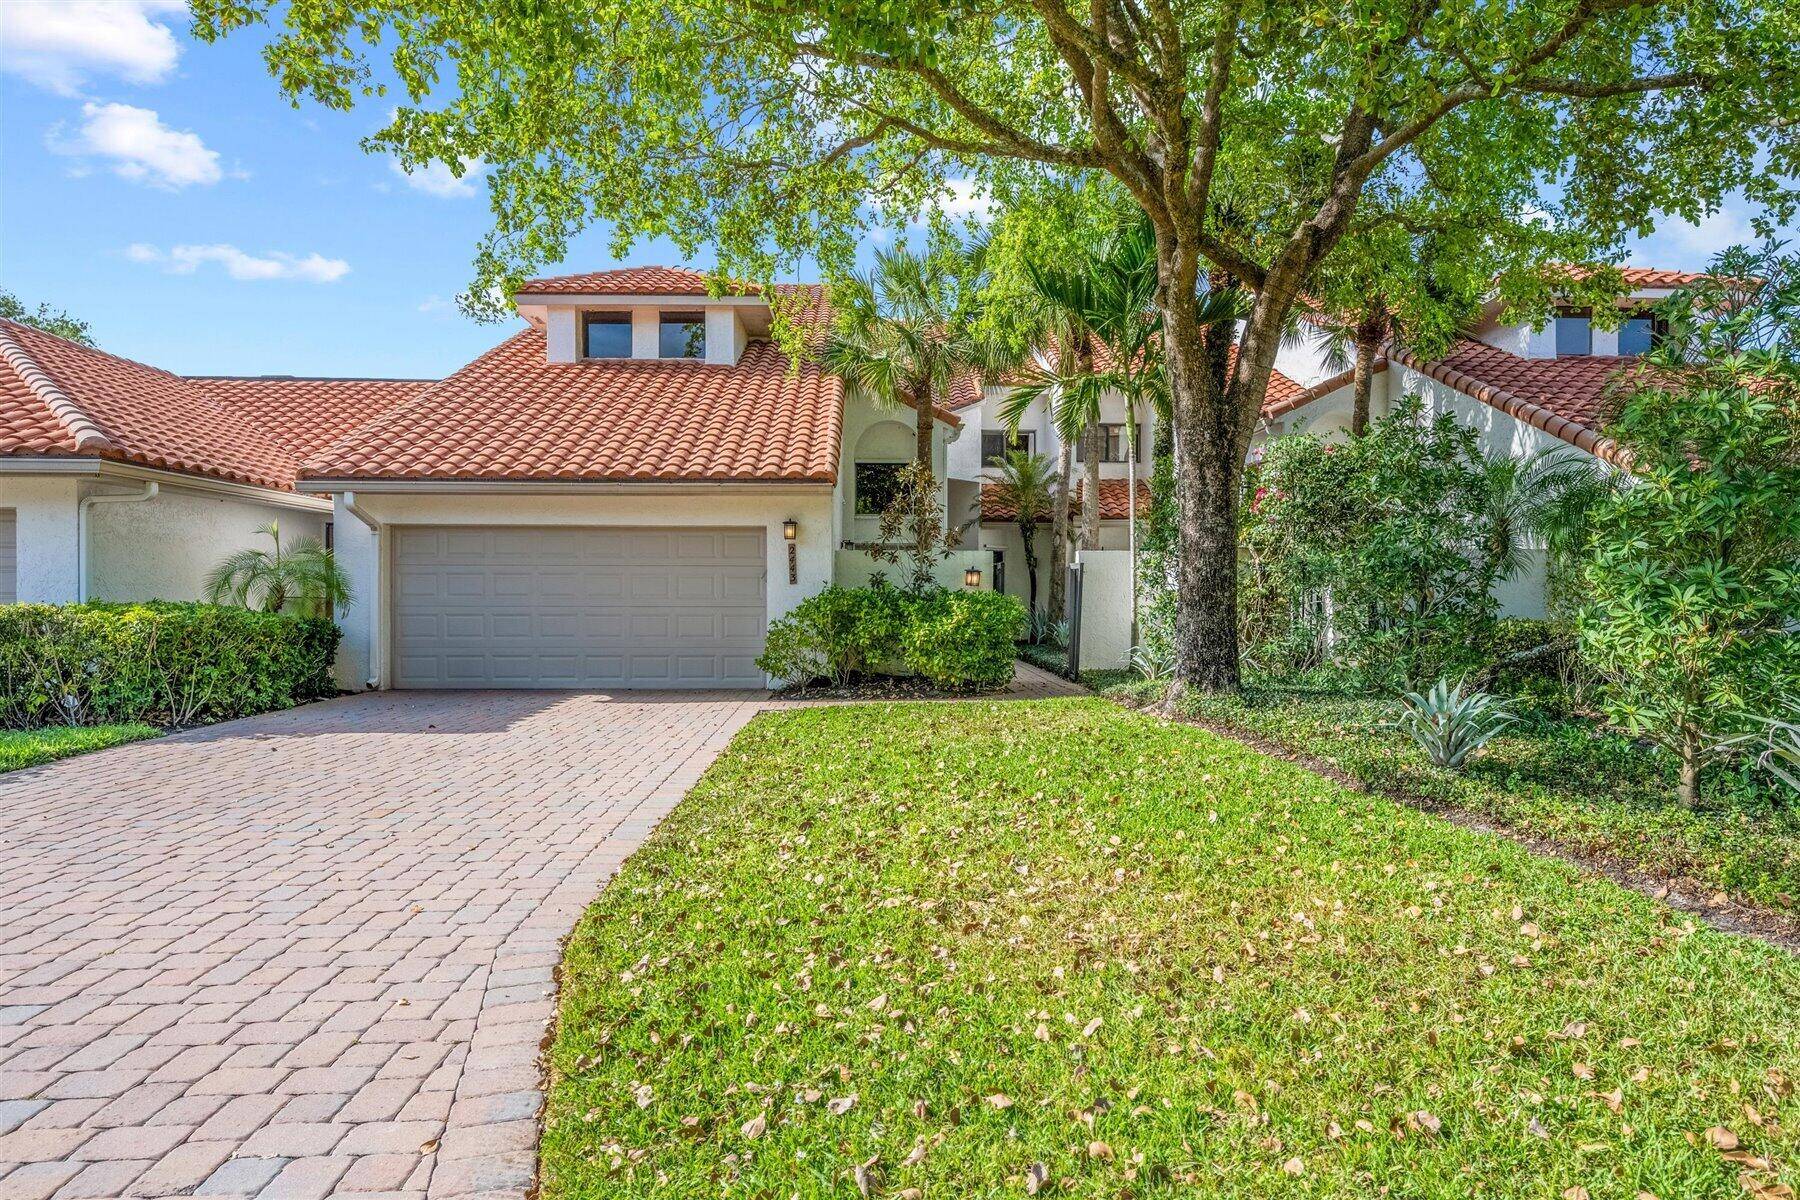 Elegantly appointed two story Town House in the lovely Windsor Way neighborhood in Palm Beach Polo.